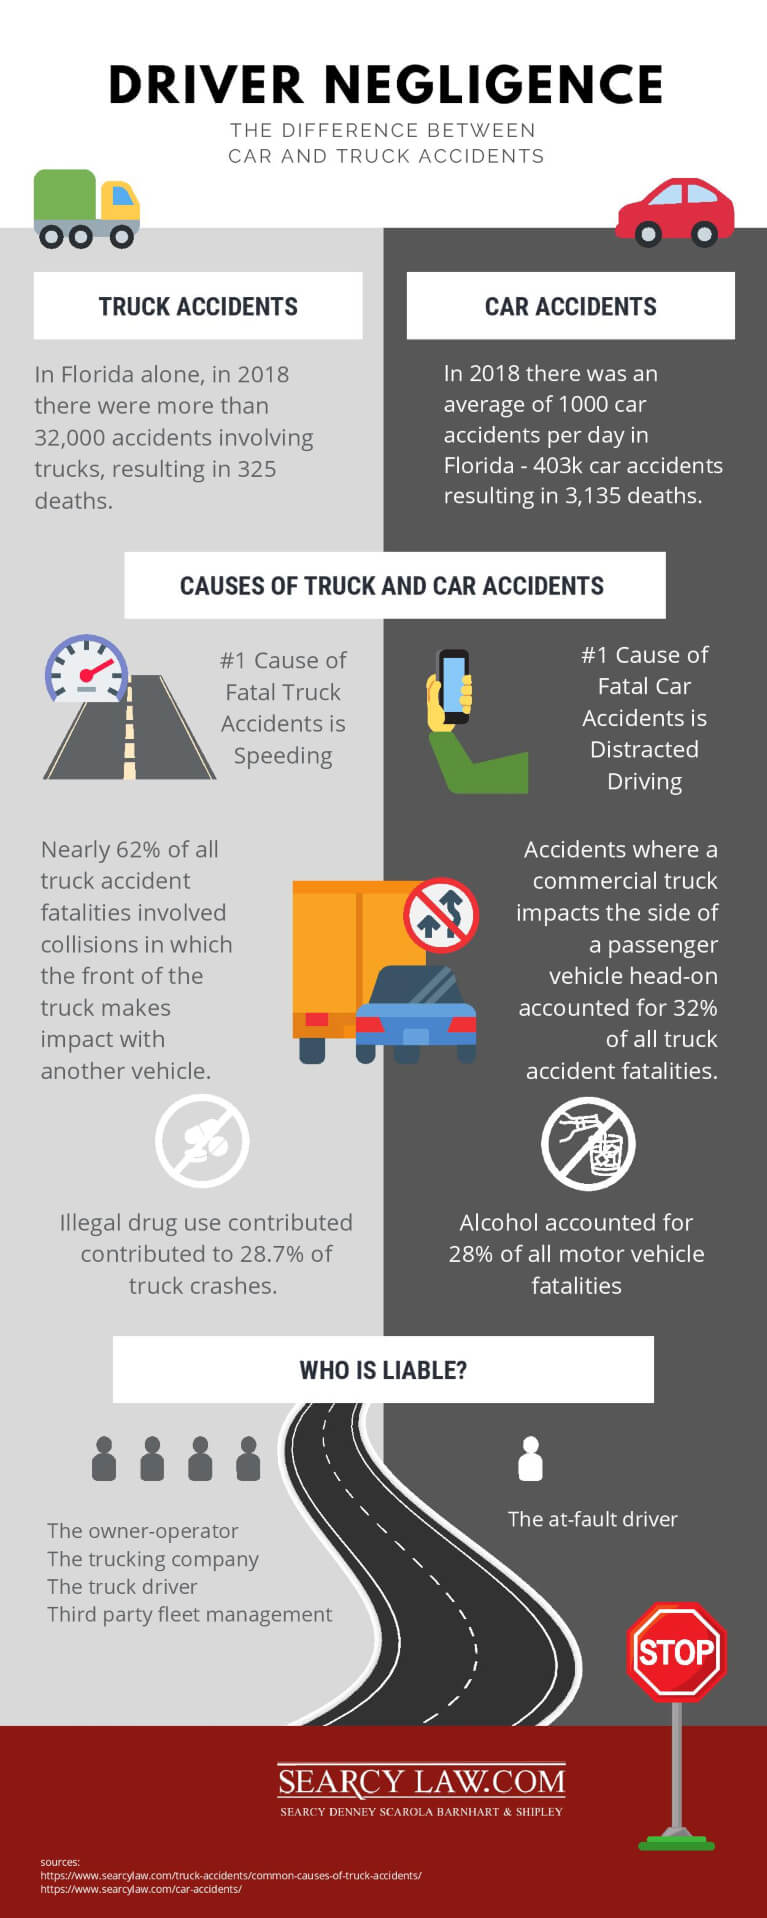 The differences between car and truck accidents.